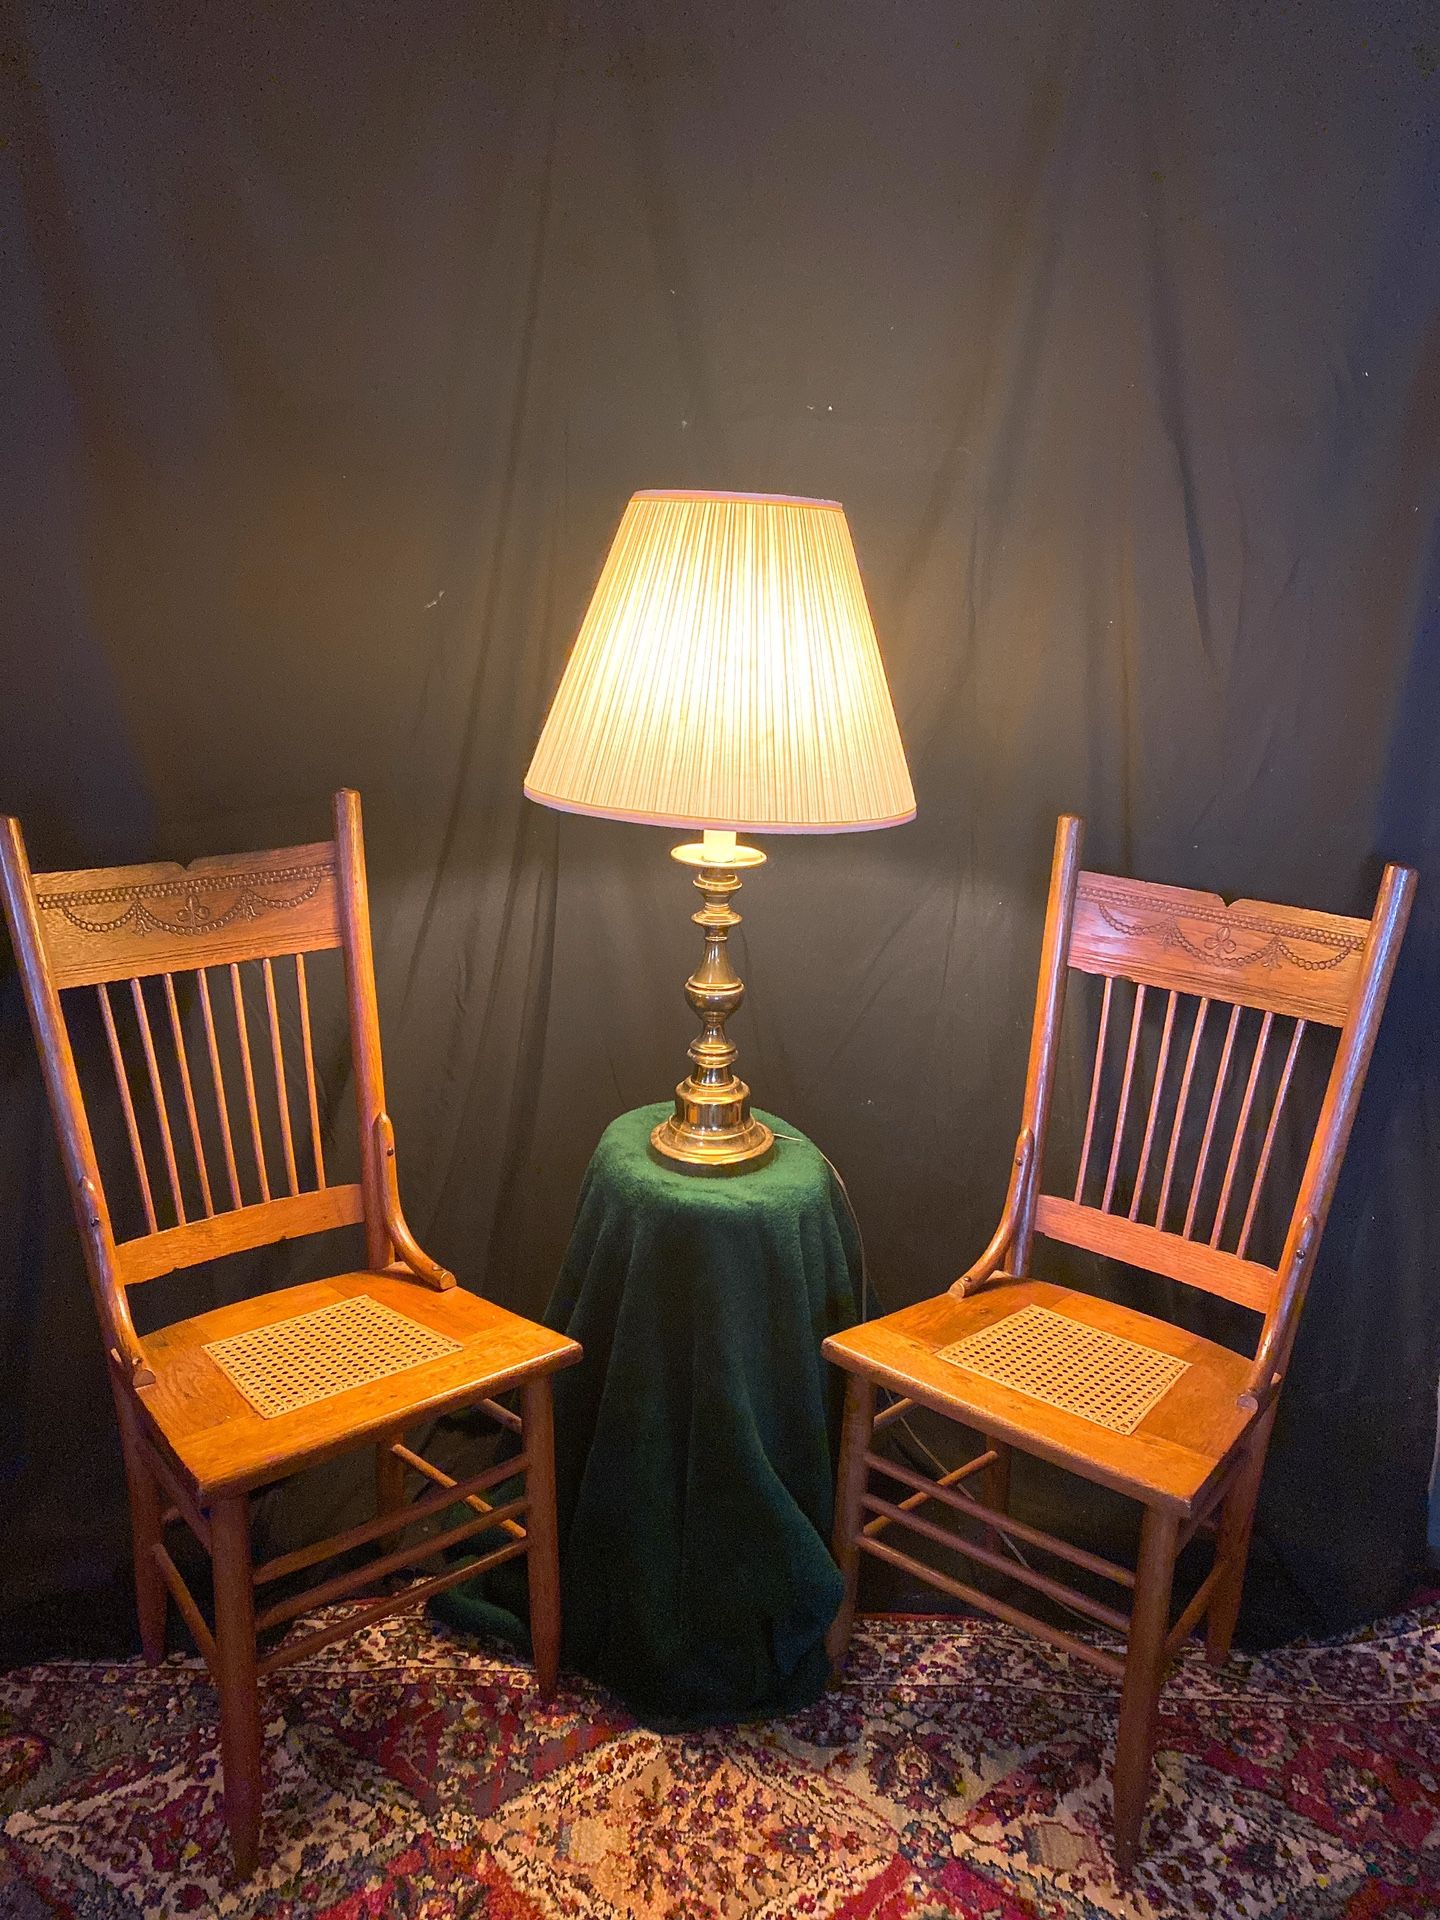 Antique chairs and a night lamp